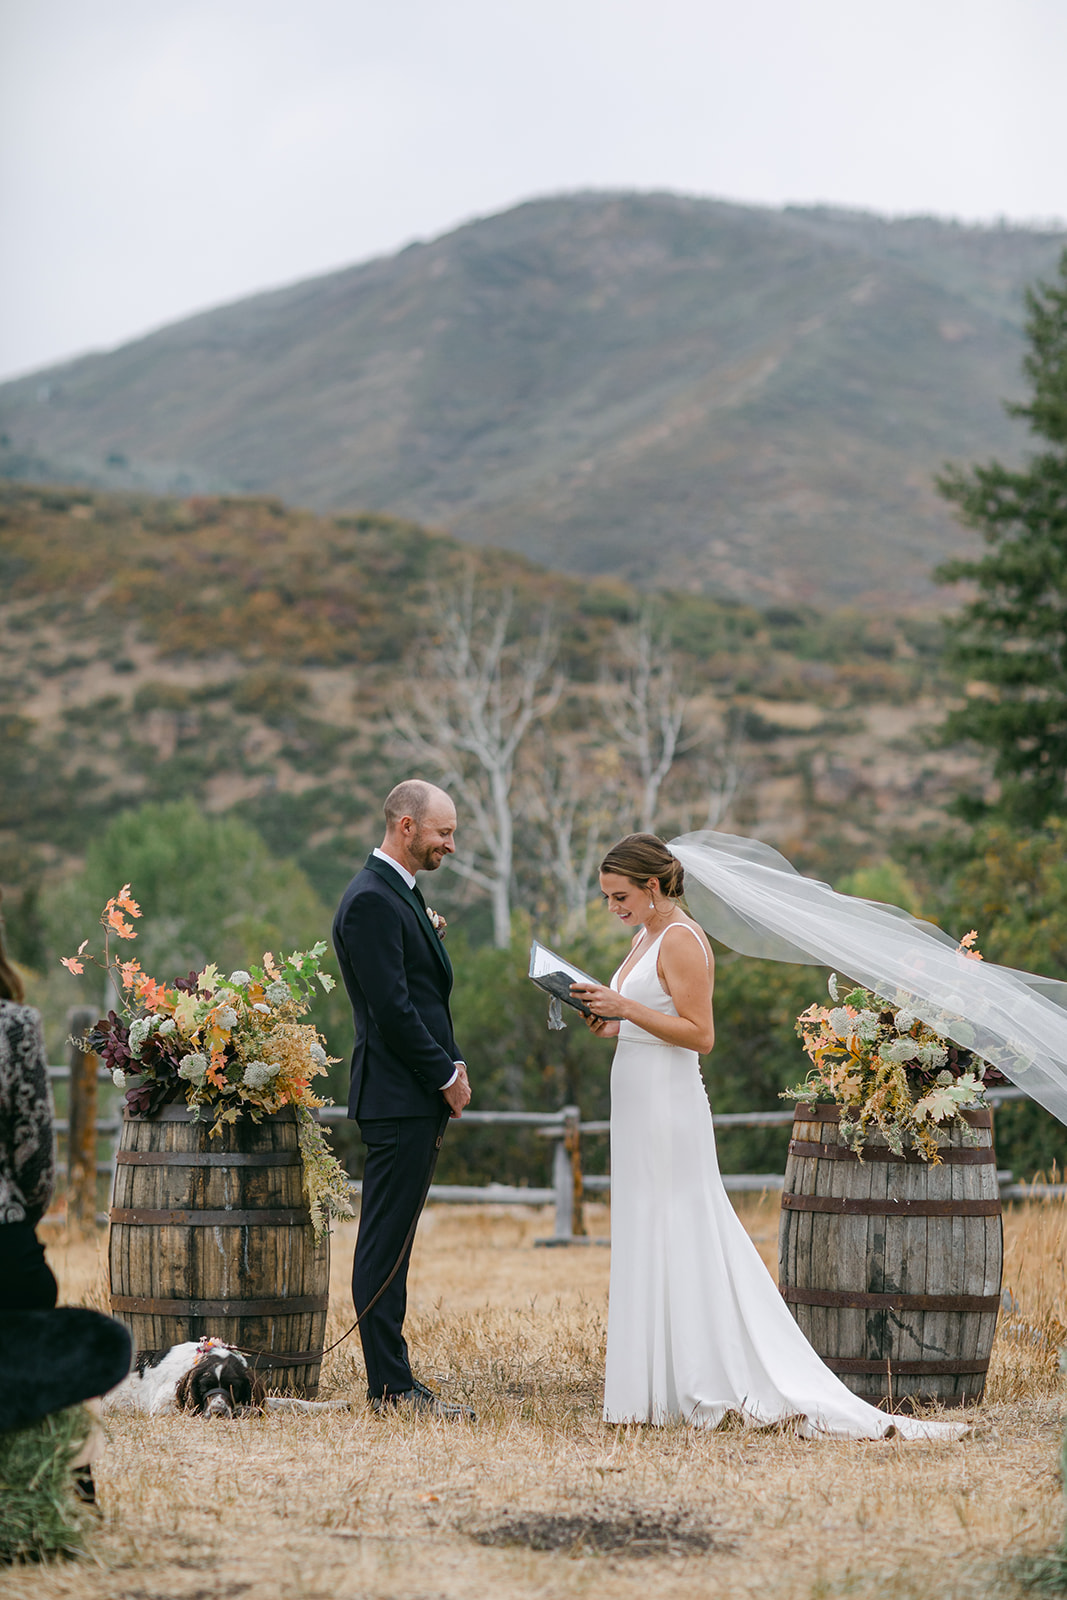 a rustic modern wedding in the high mountains of Utah. The bride is a caucasian female wearing a white crepe fabric wedding dress.